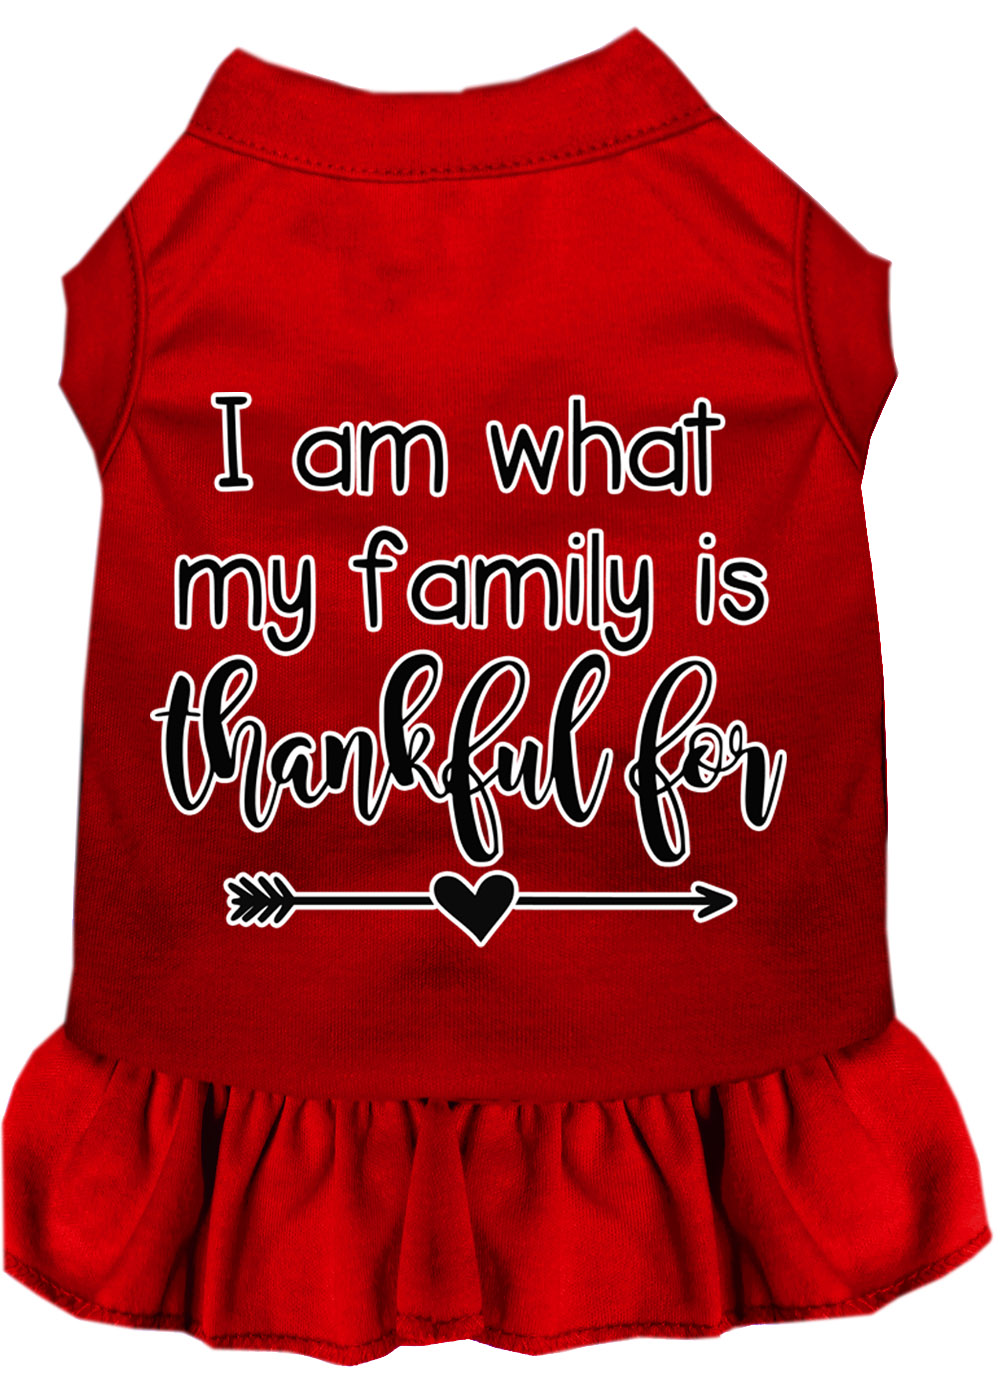 I Am What My Family is Thankful For Screen Print Dog Dress Red 4X